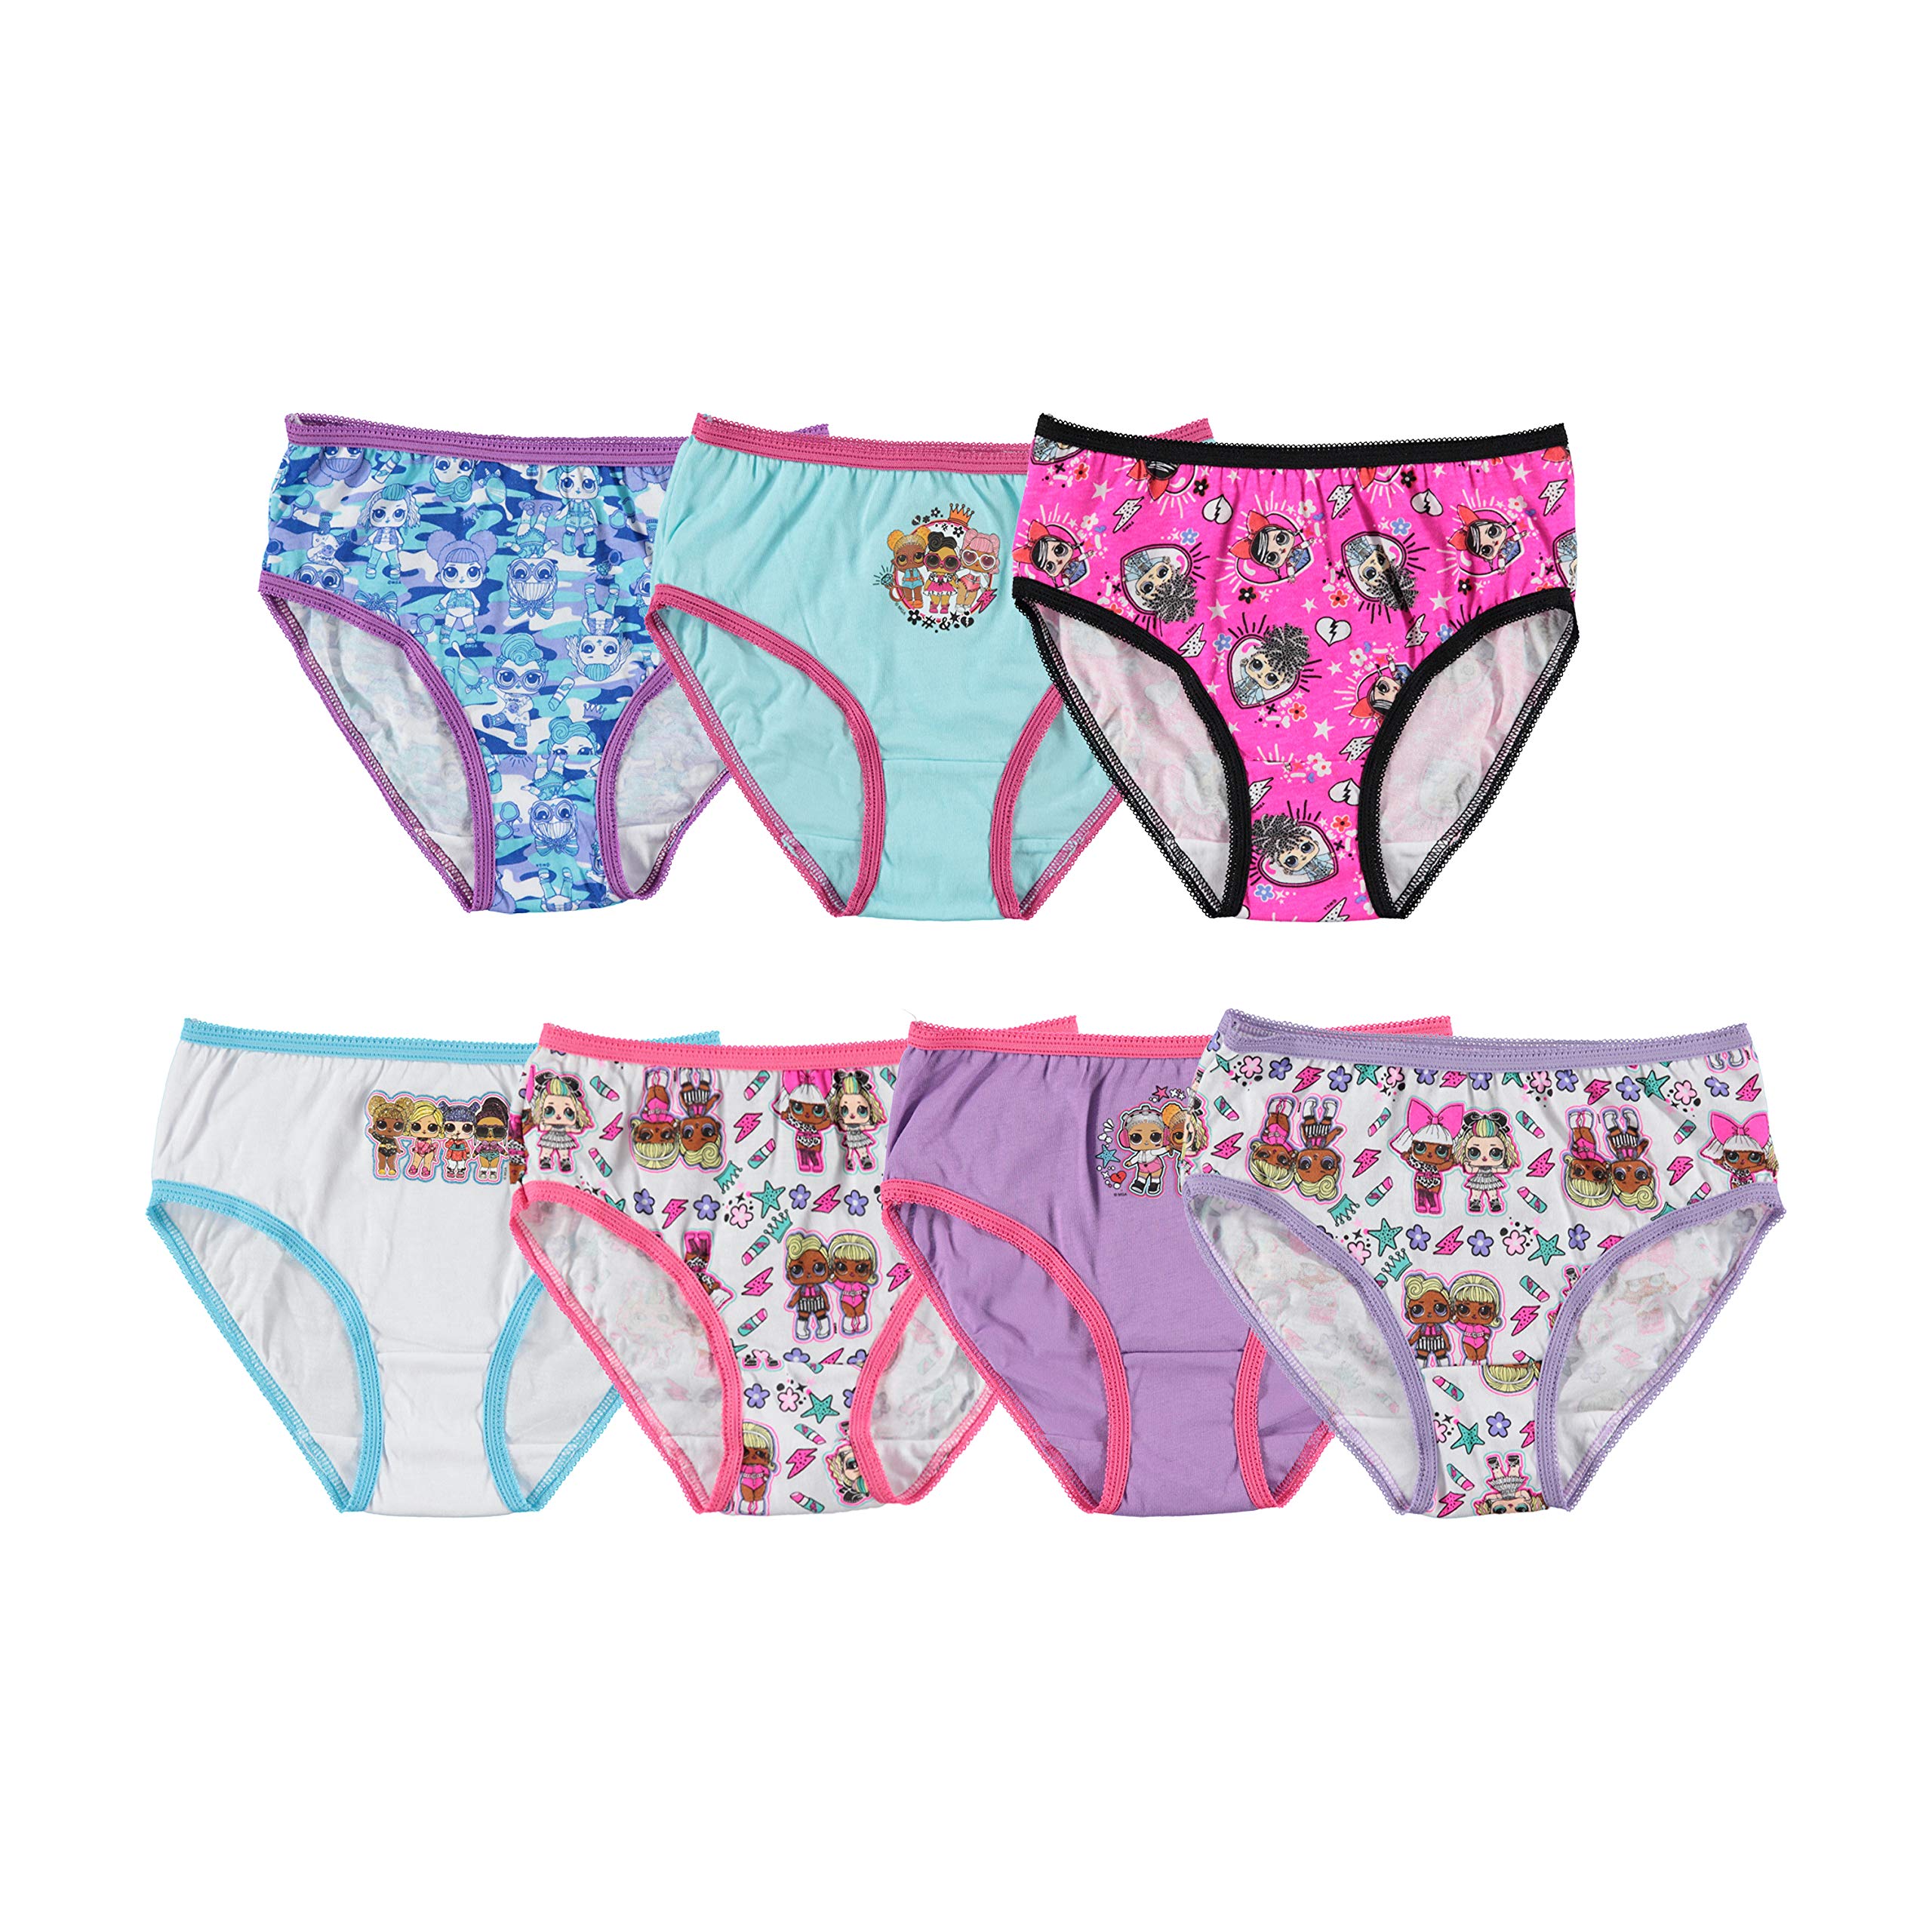 L.O.L. Surprise! Girls' 100% Cotton Underwear 7-Pack Sizes 2/3t, 4t, 4, 6 and 8